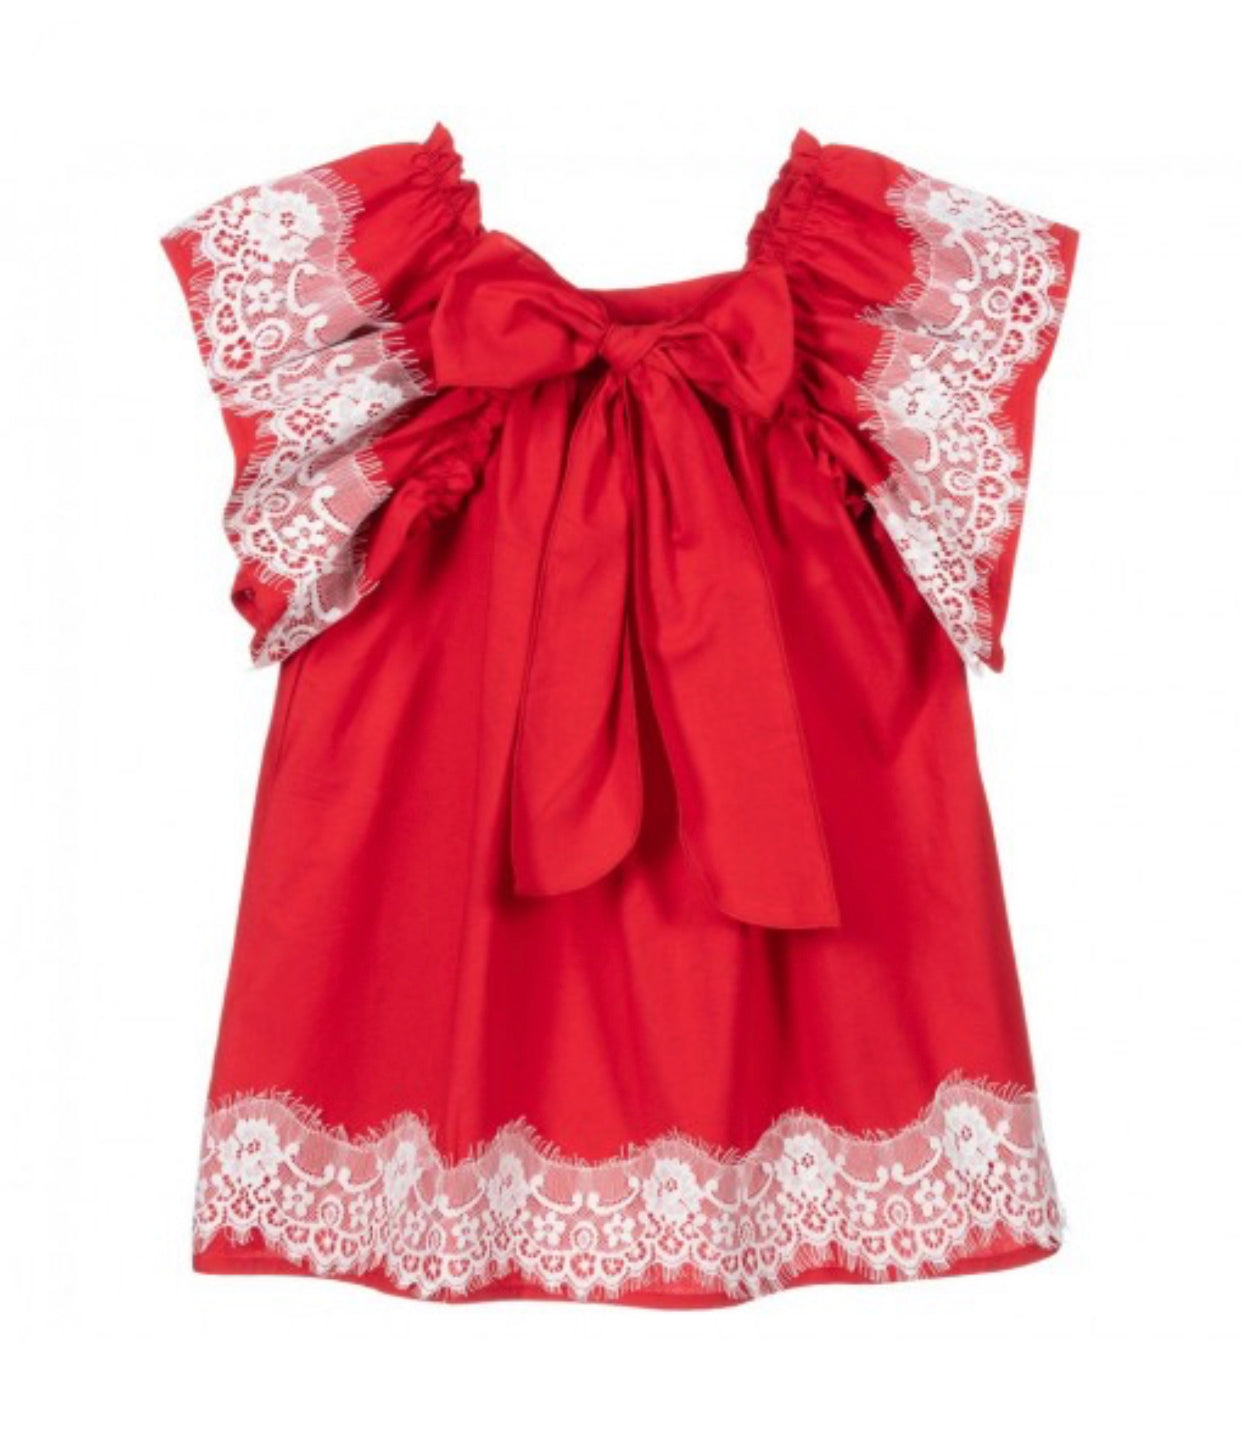 Phi Clothing Girls Red & White Lace Dress